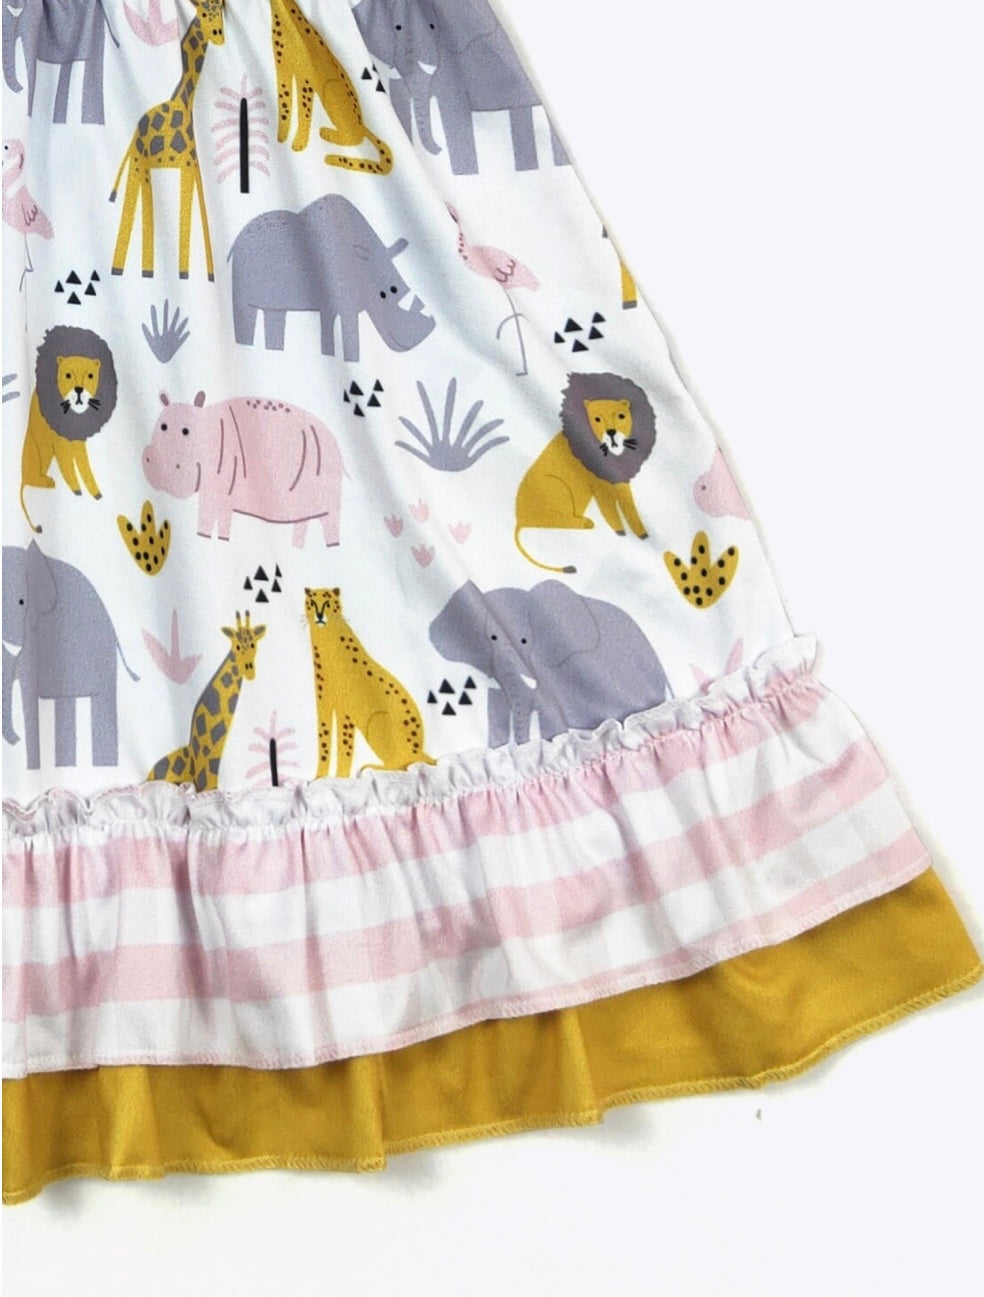 Zoo Days Dress by Clover Cottage